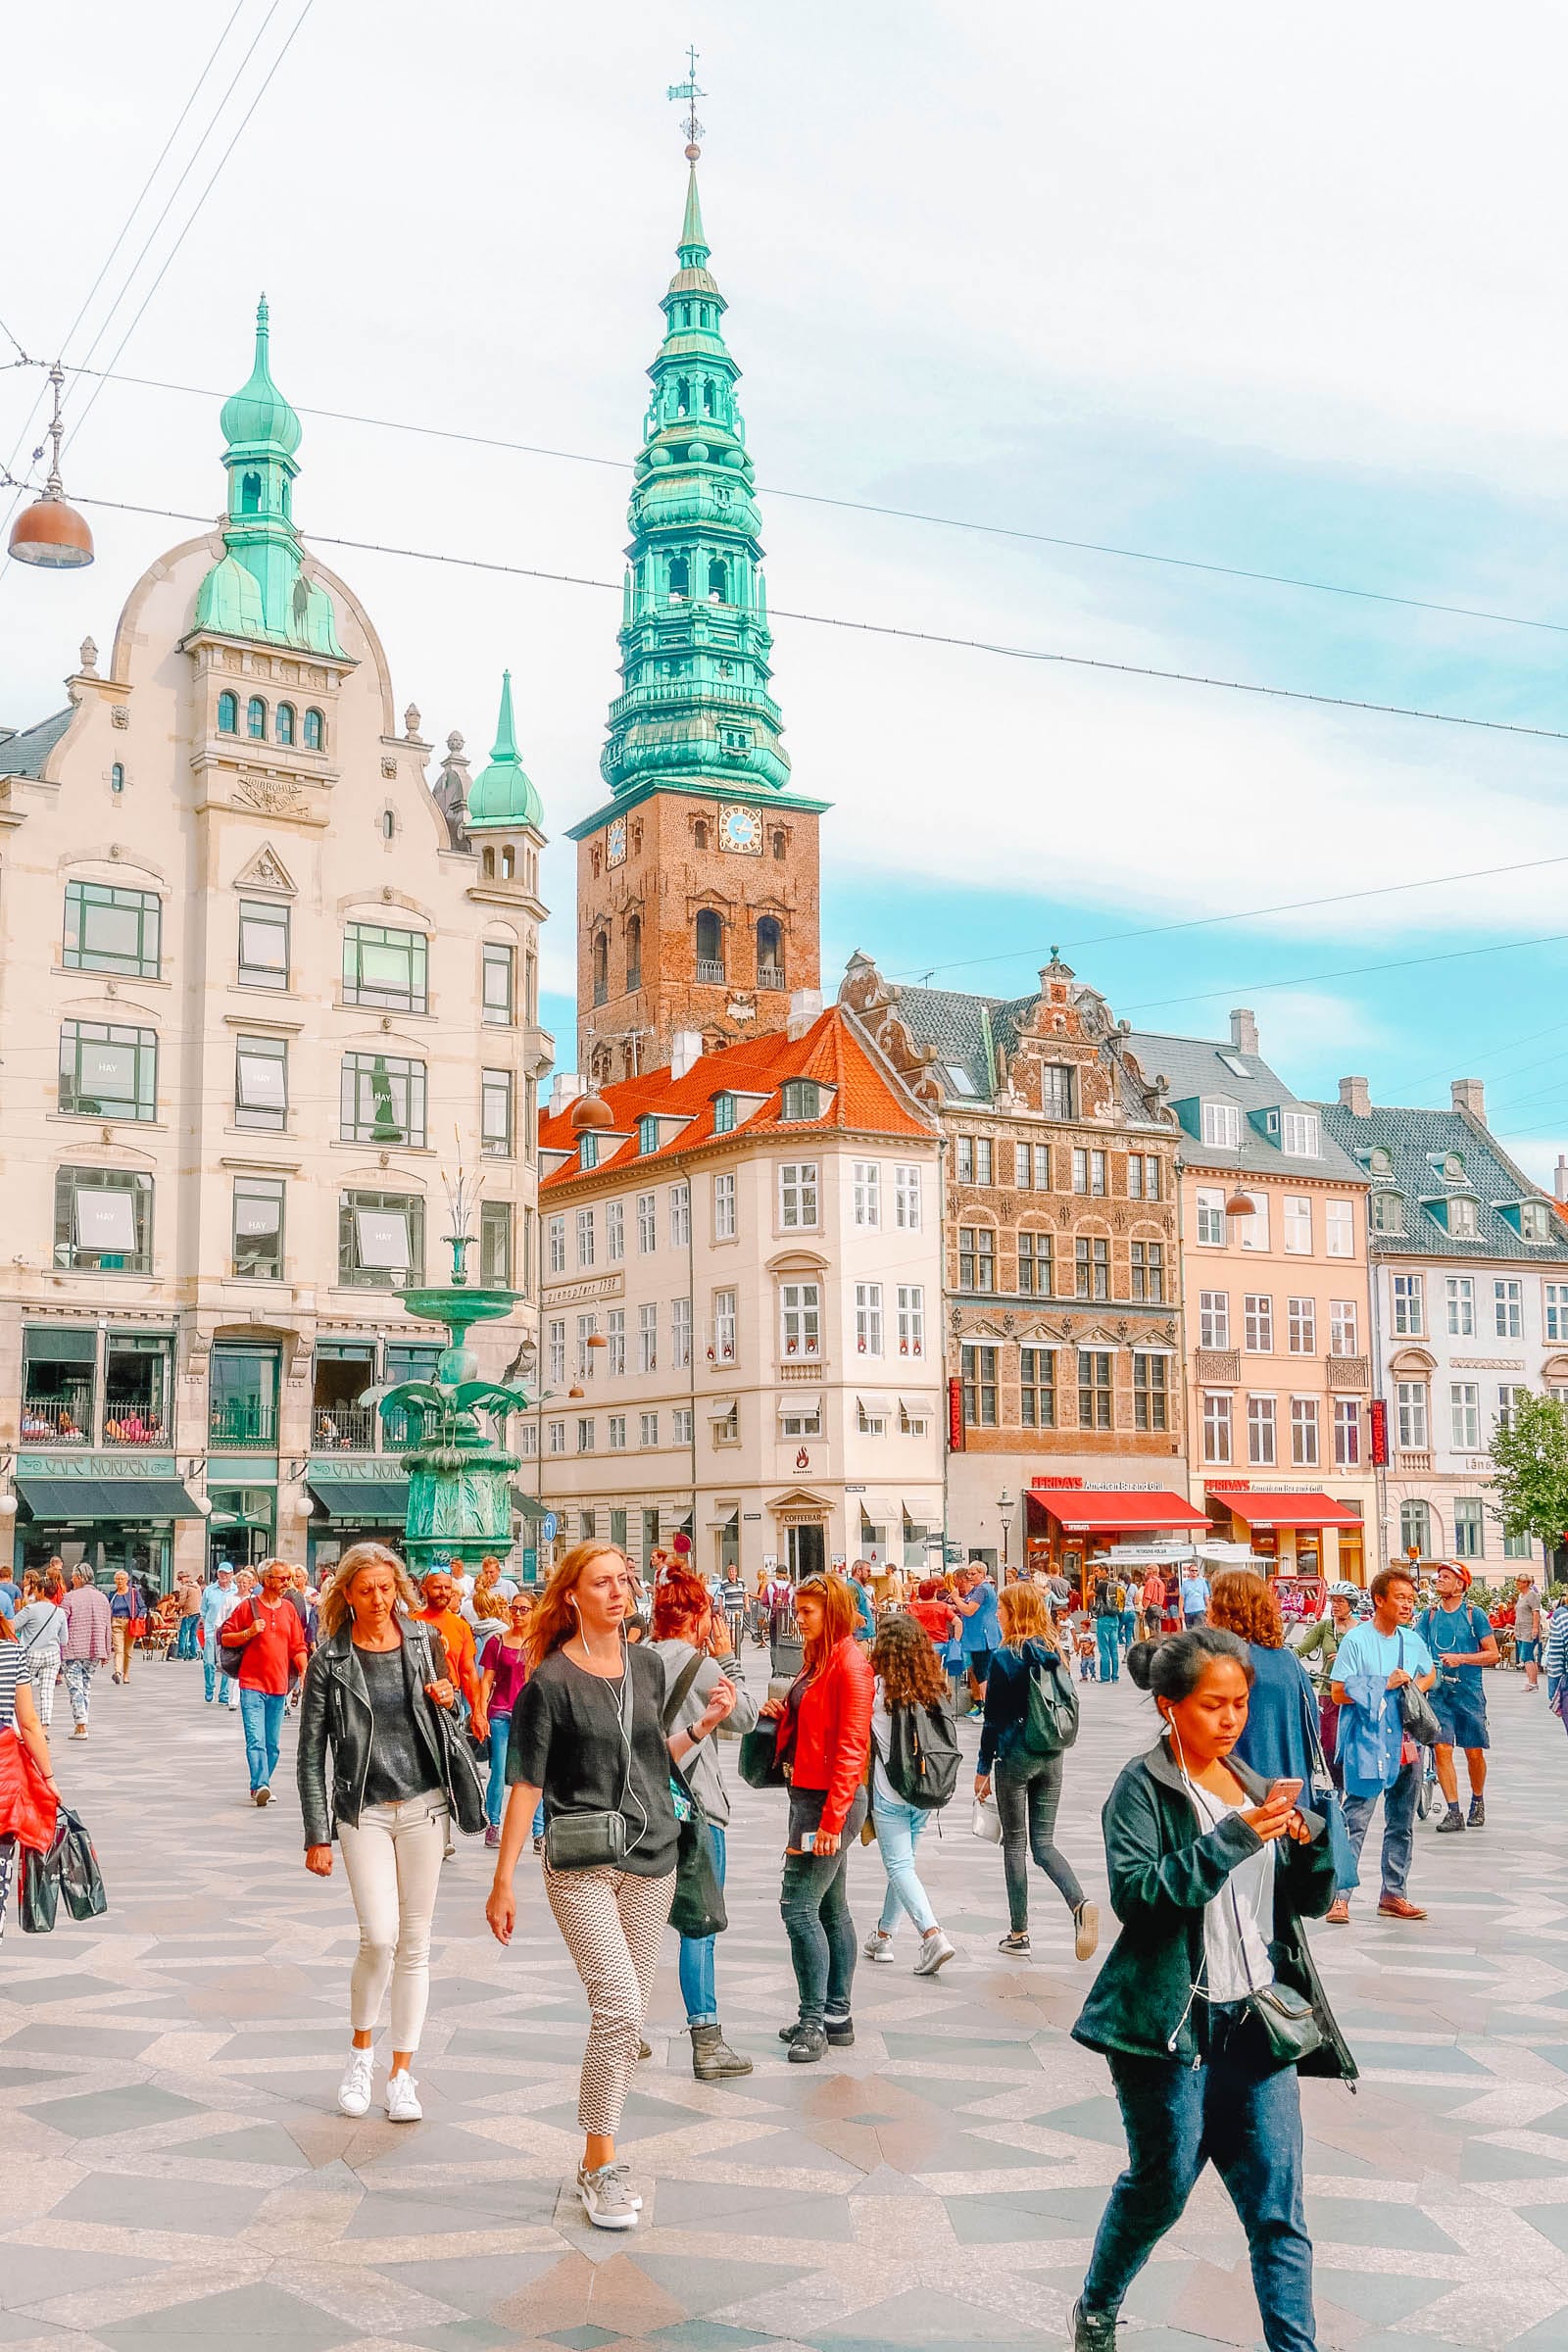 Your Guide To Visiting Denmark - Hand Only - Food & Photography Blog